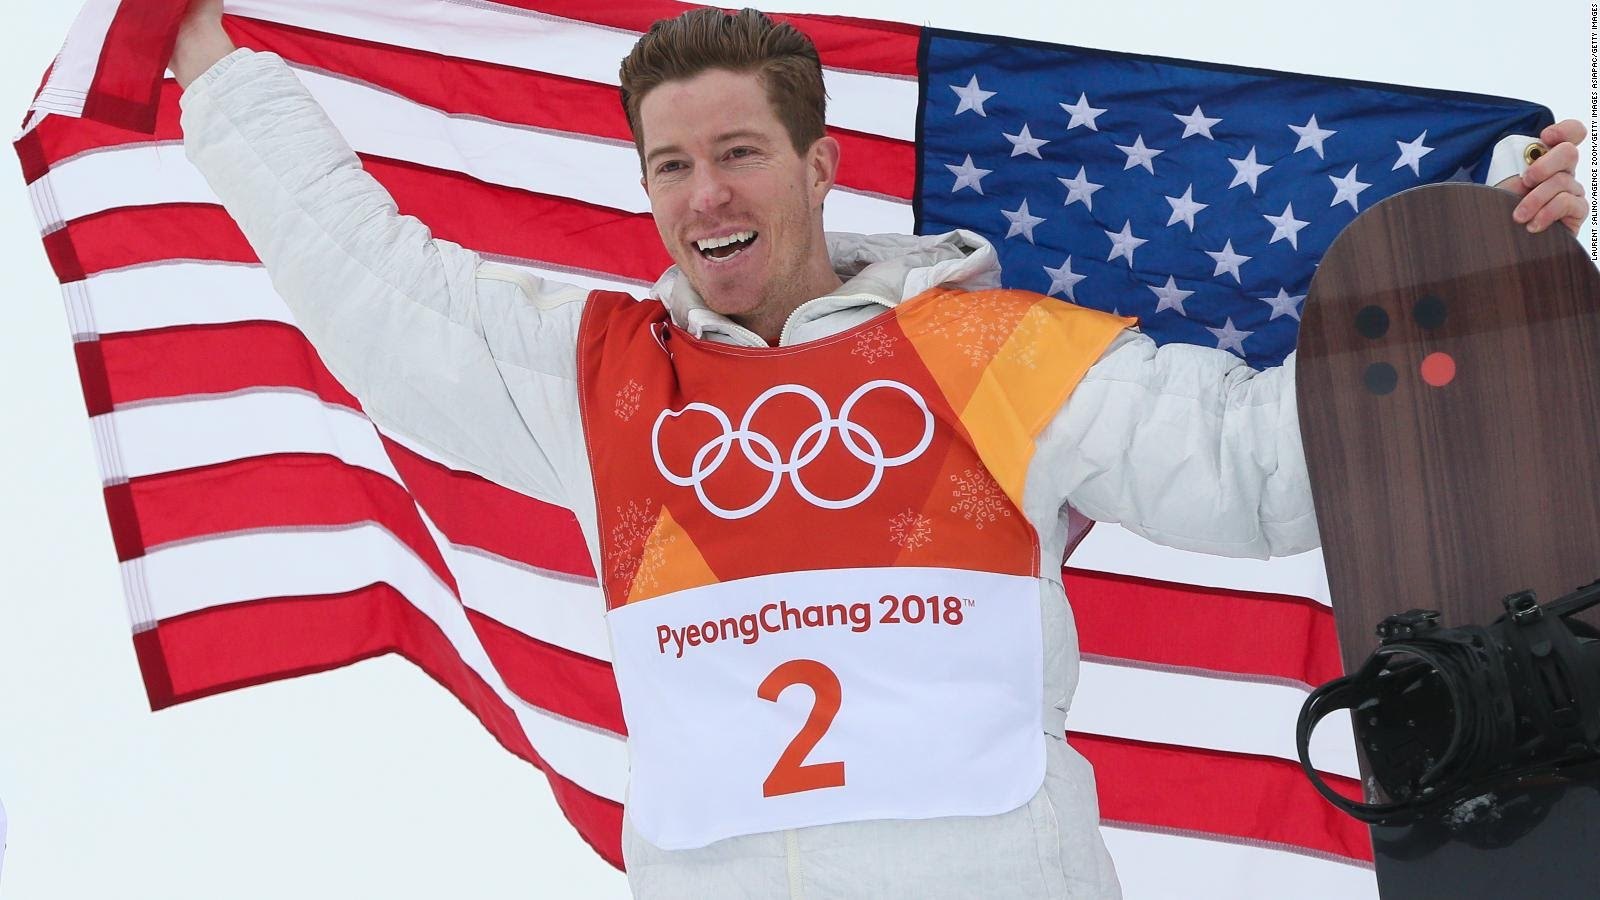 These Are the Highest-Paid Olympic Athletes of All Time